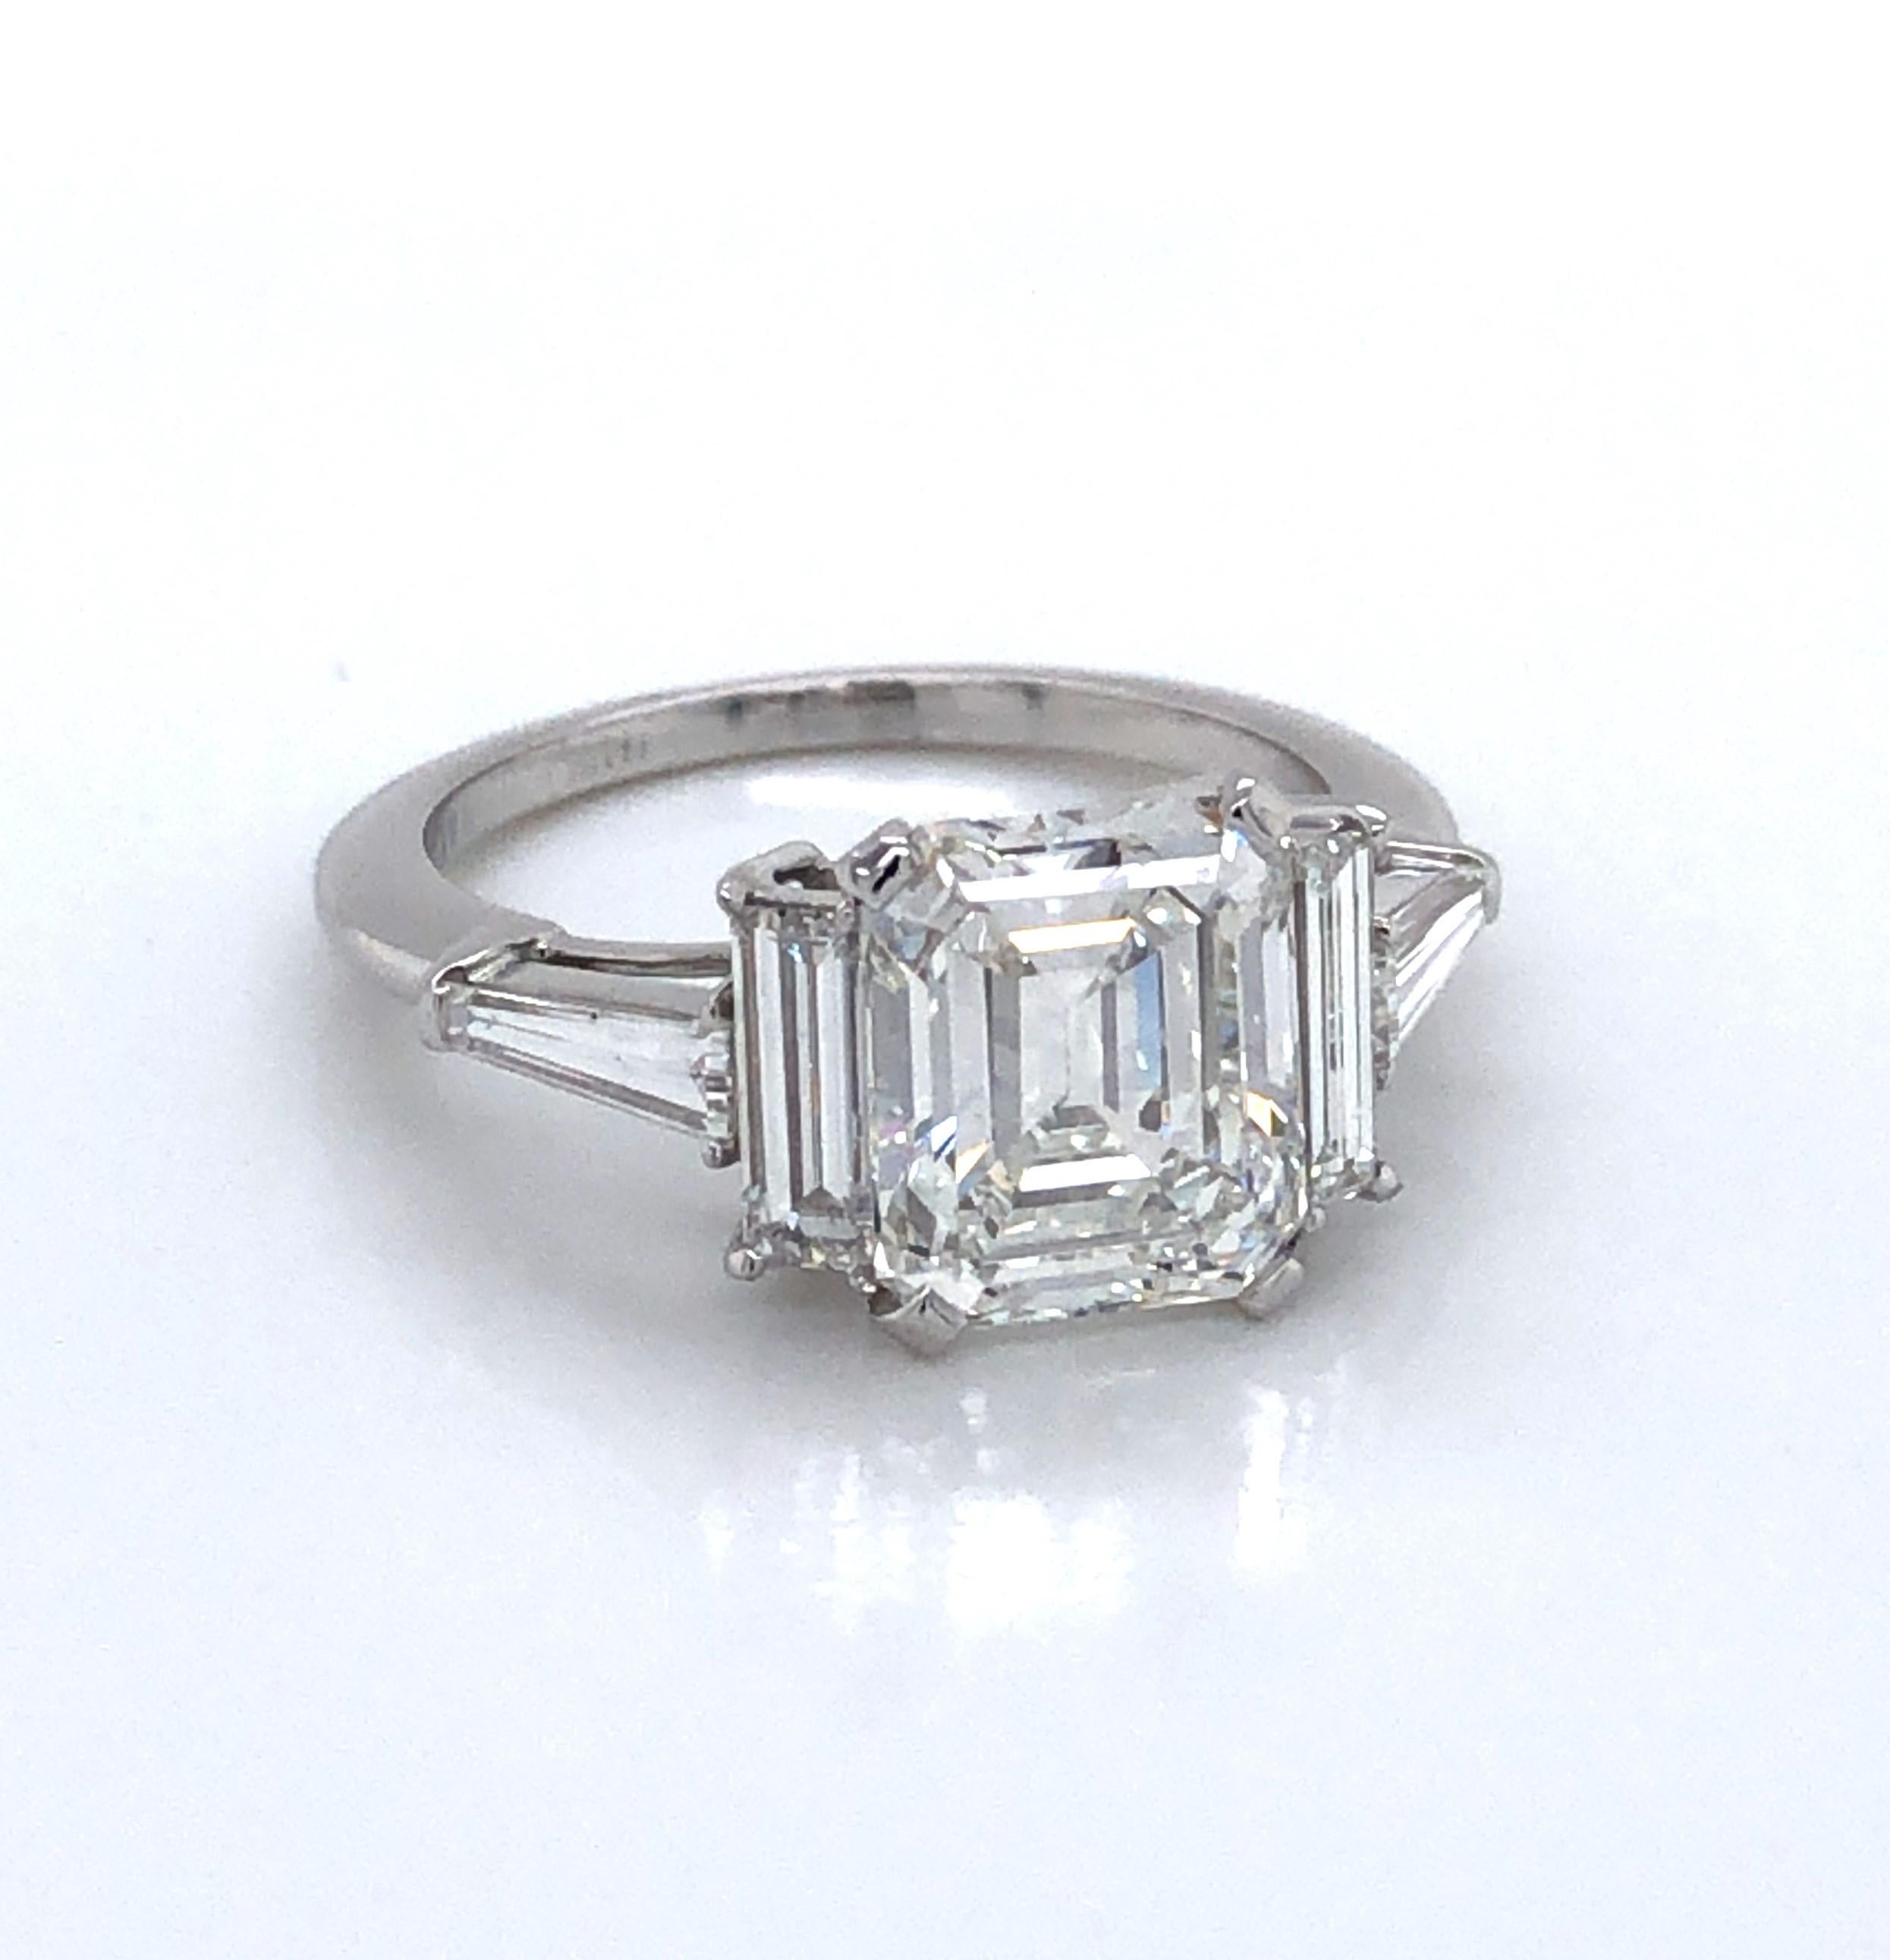 Undeniably spectacular and sure to get her attention, this 3.01 carat emerald cut diamond engagement ring is beautifully set in platinum and highlighted by two .04 carat diamond baggets. 
Boasting a 3.01  carat GIA certified emerald cut diamond